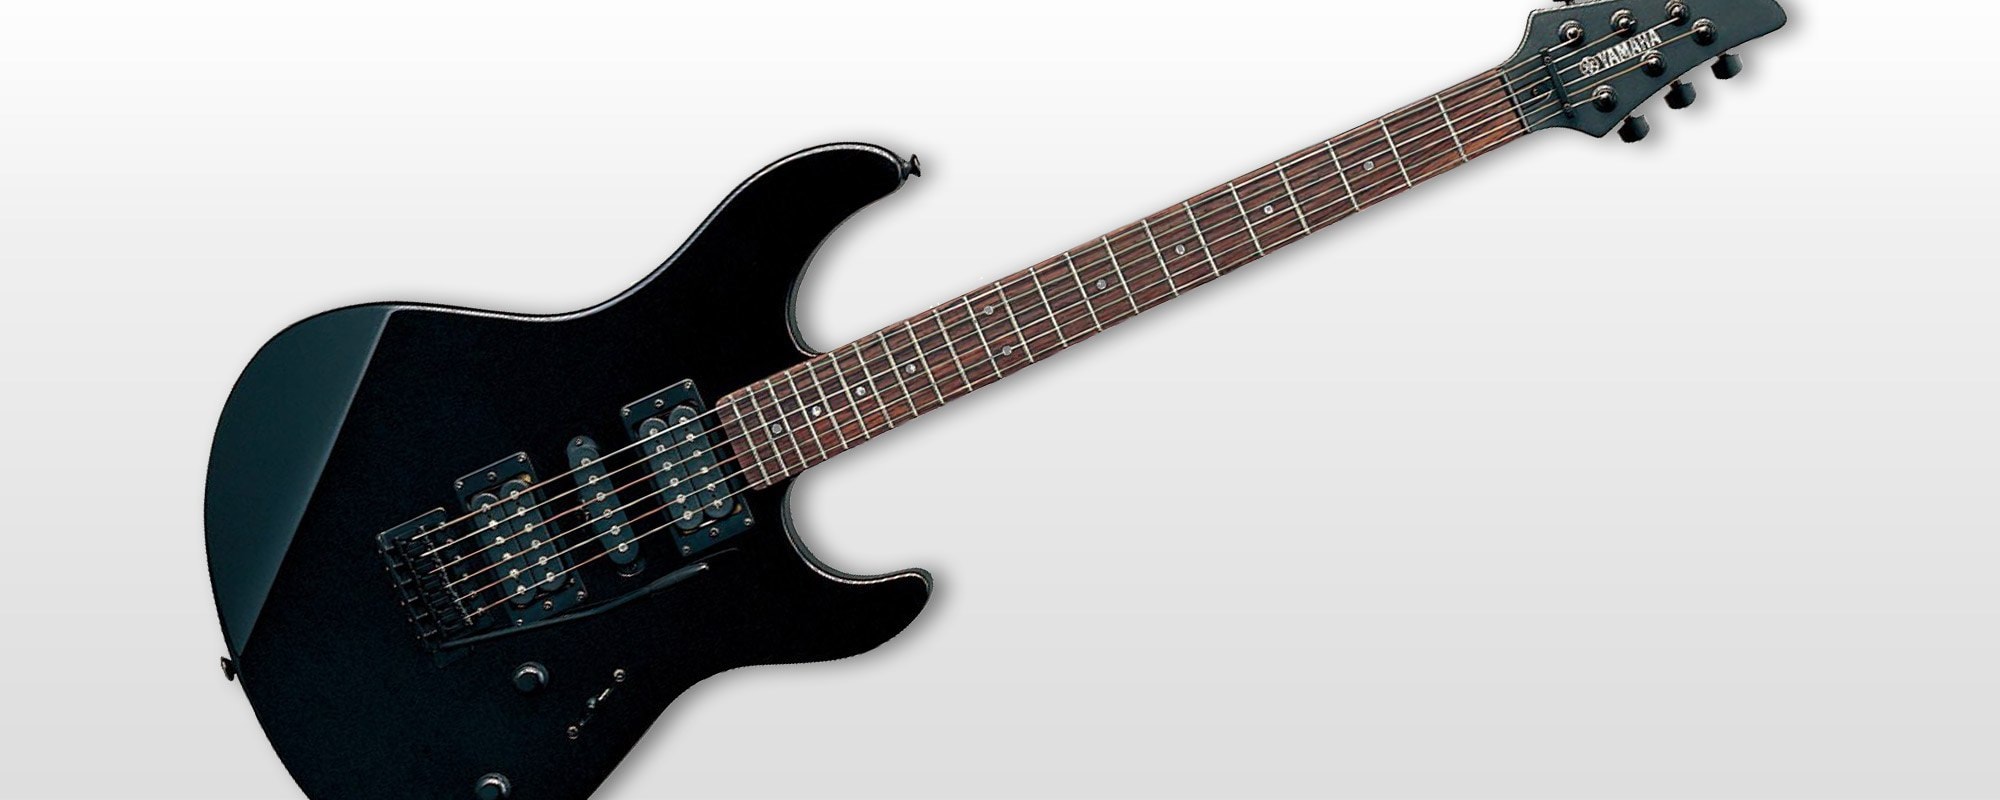 RGX - Overview - Electric Guitars - Guitars, Basses & Amps 